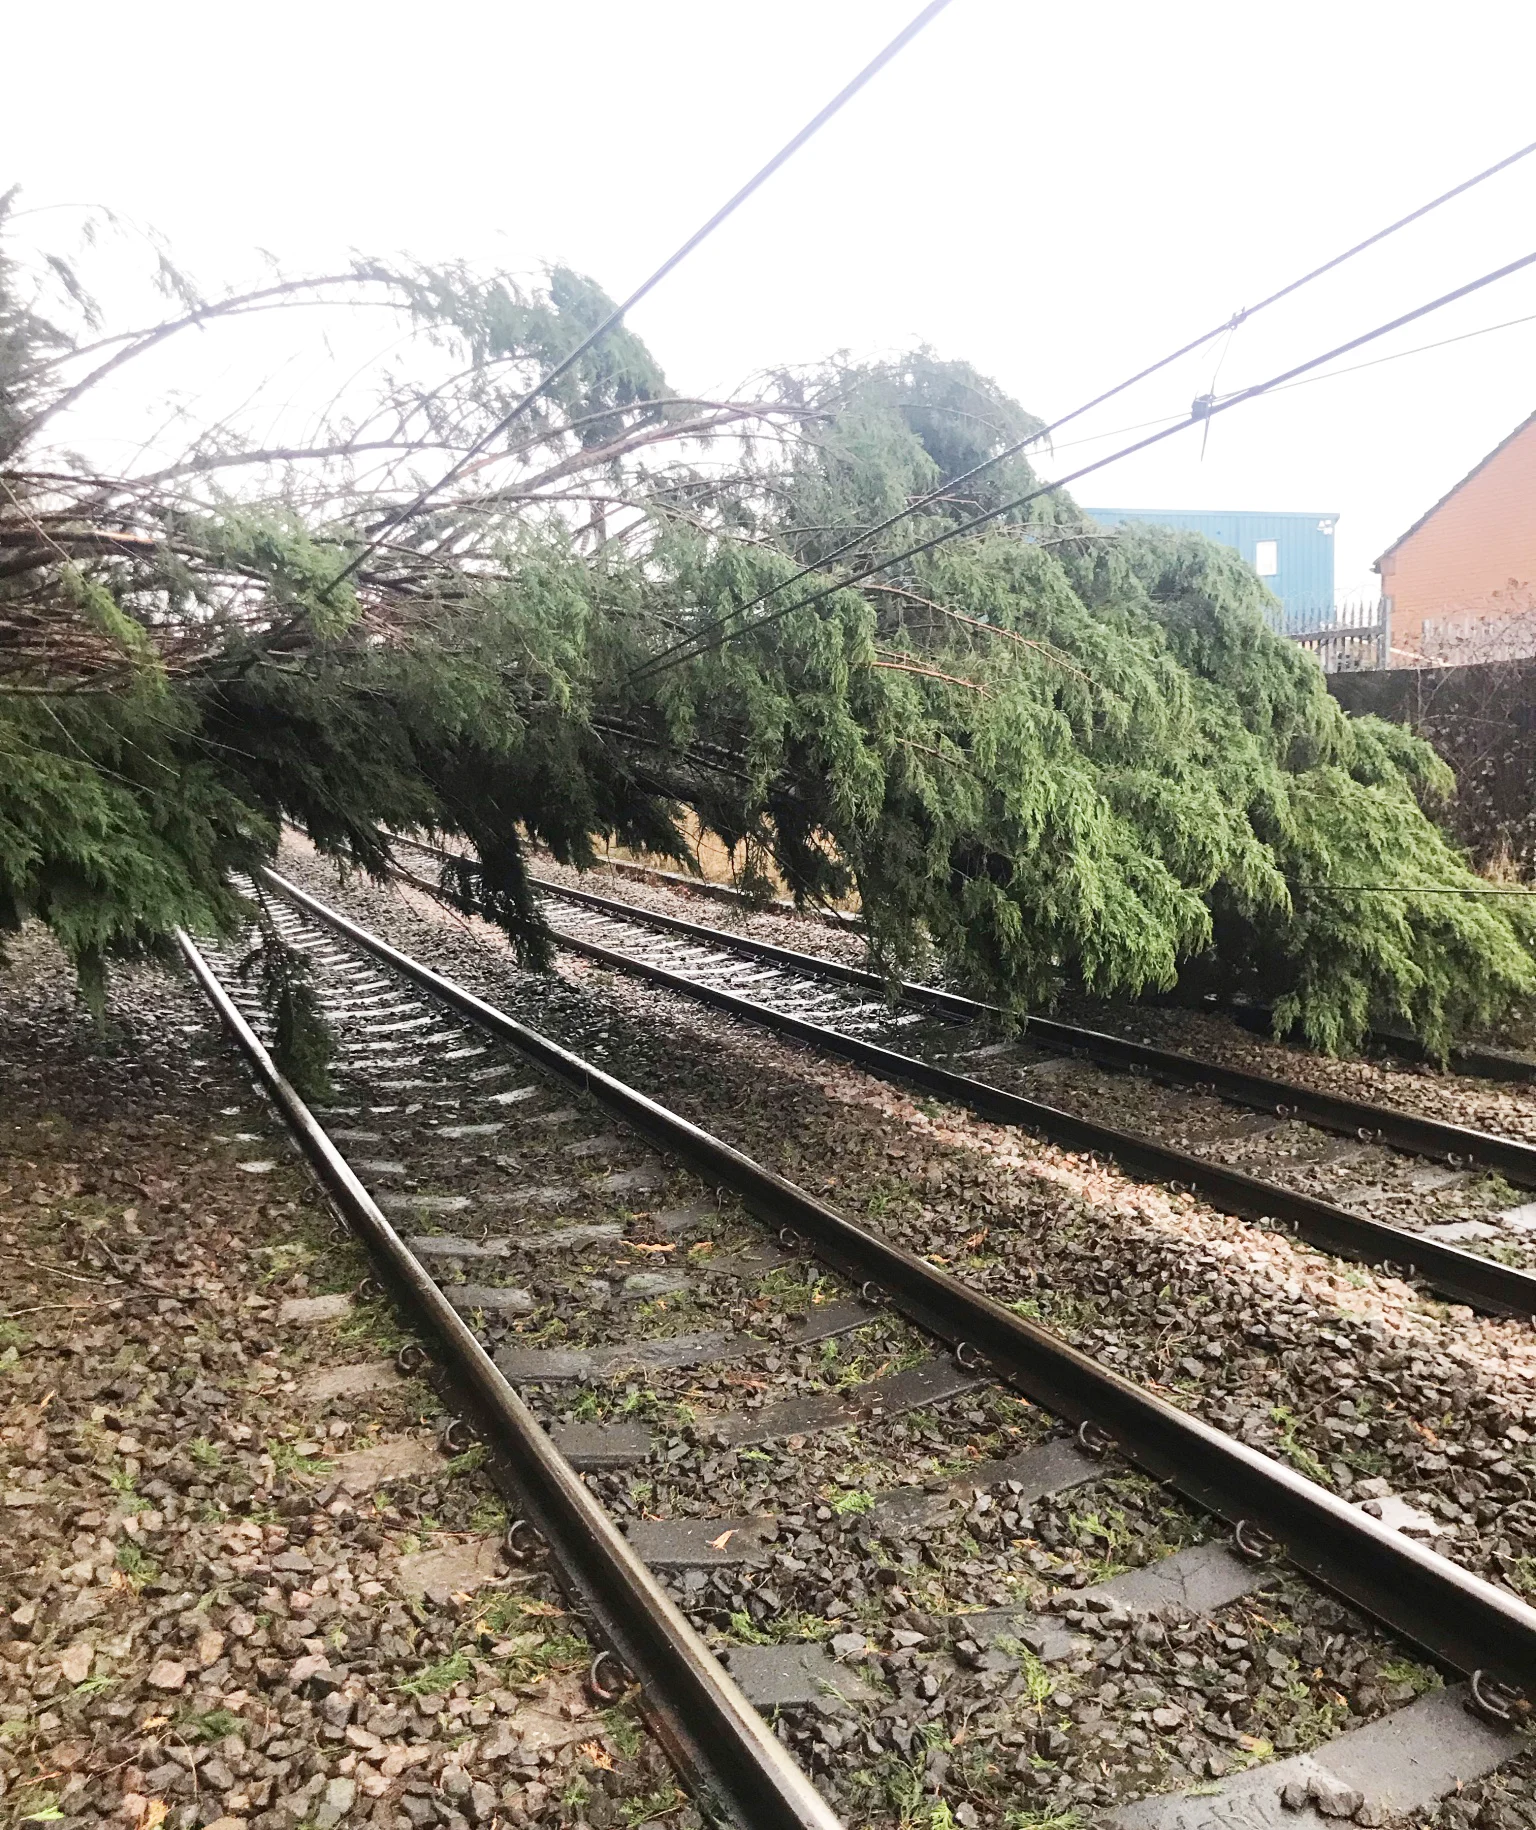 A large tree that has fallen across railway tracks, blocking the line